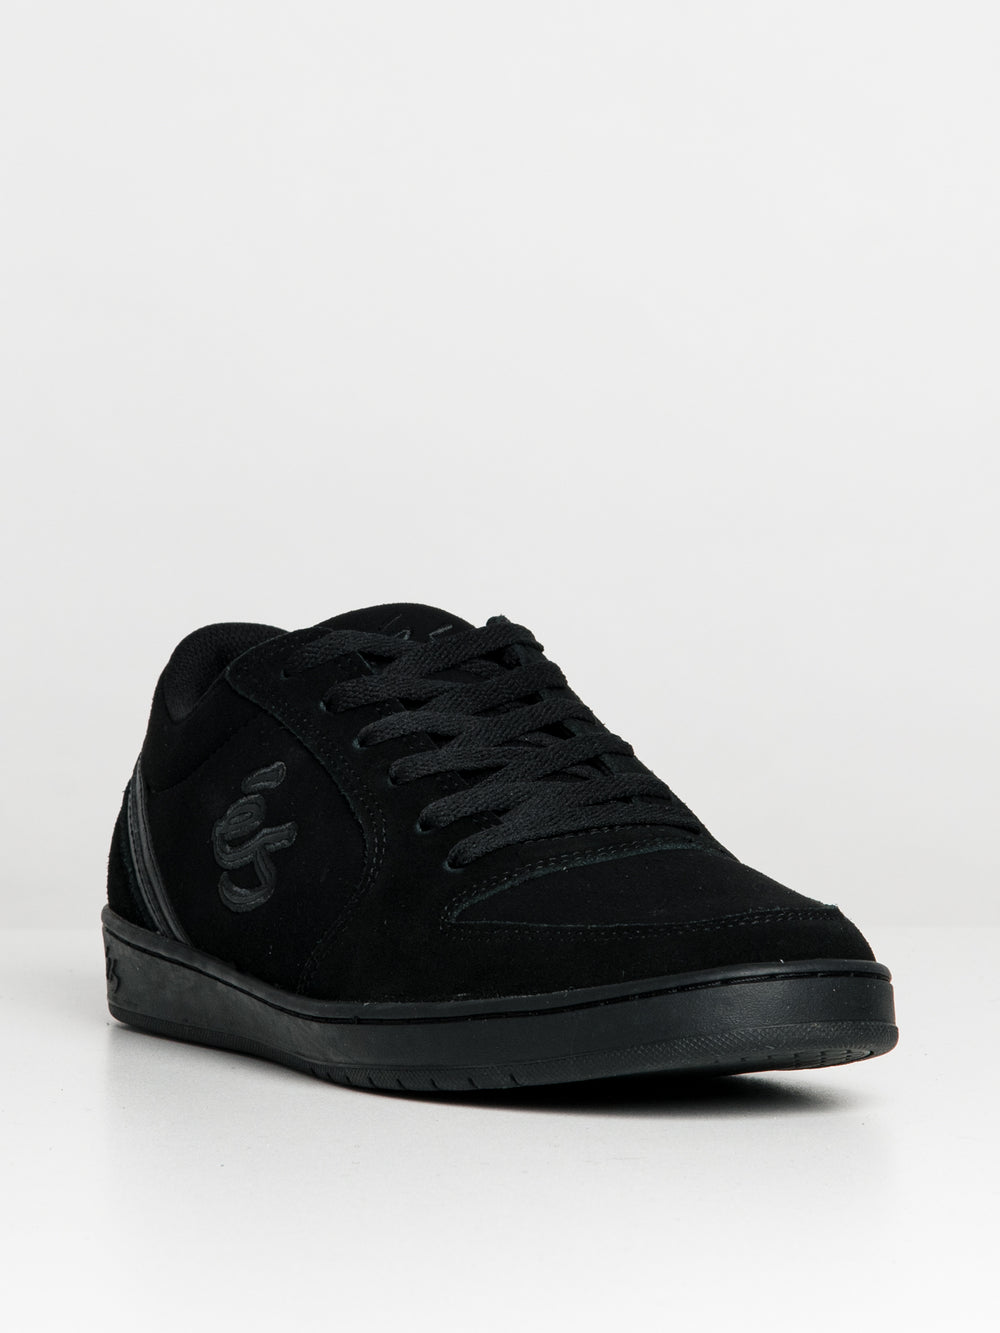 MENS ES SHOES EOS SNEAKER - CLEARANCE